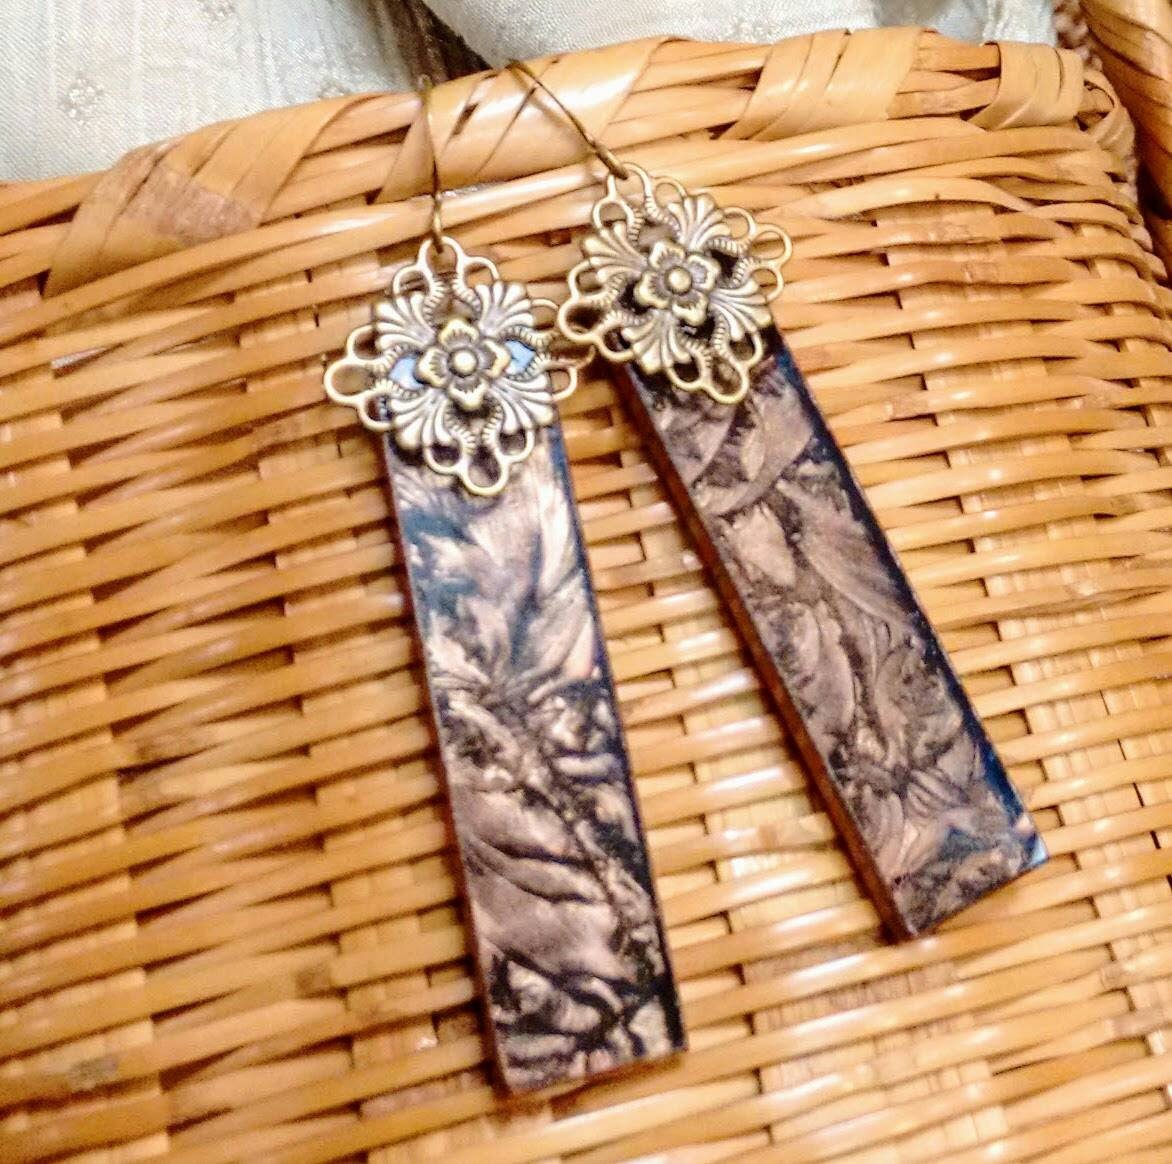 Bronze Van Gogh stained glass earrings